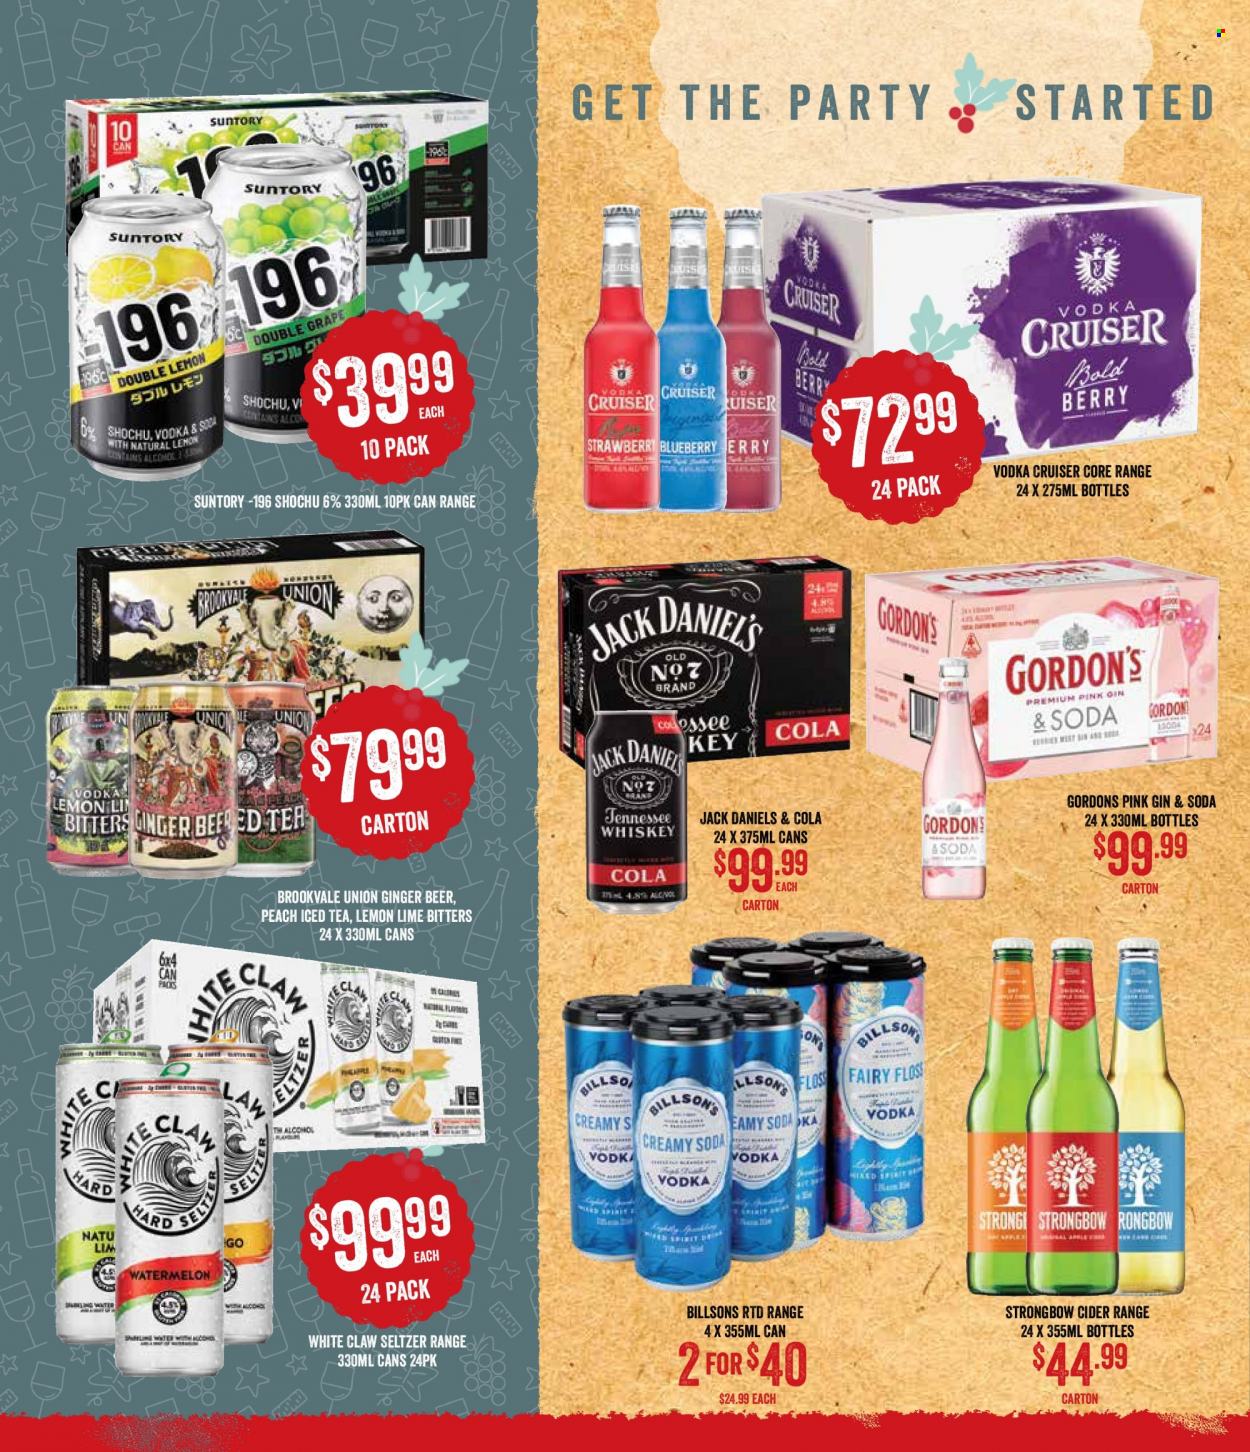 thumbnail - Spudshed Catalogue - 30 Nov 2022 - 6 Dec 2022 - Sales products - watermelon, Jack Daniel's, ice tea, seltzer water, soda, gin, Tennessee Whiskey, vodka, whiskey, Gordon's, White Claw, whisky, Vodka Cruiser, cider, beer, Fairy, ginger beer. Page 15.